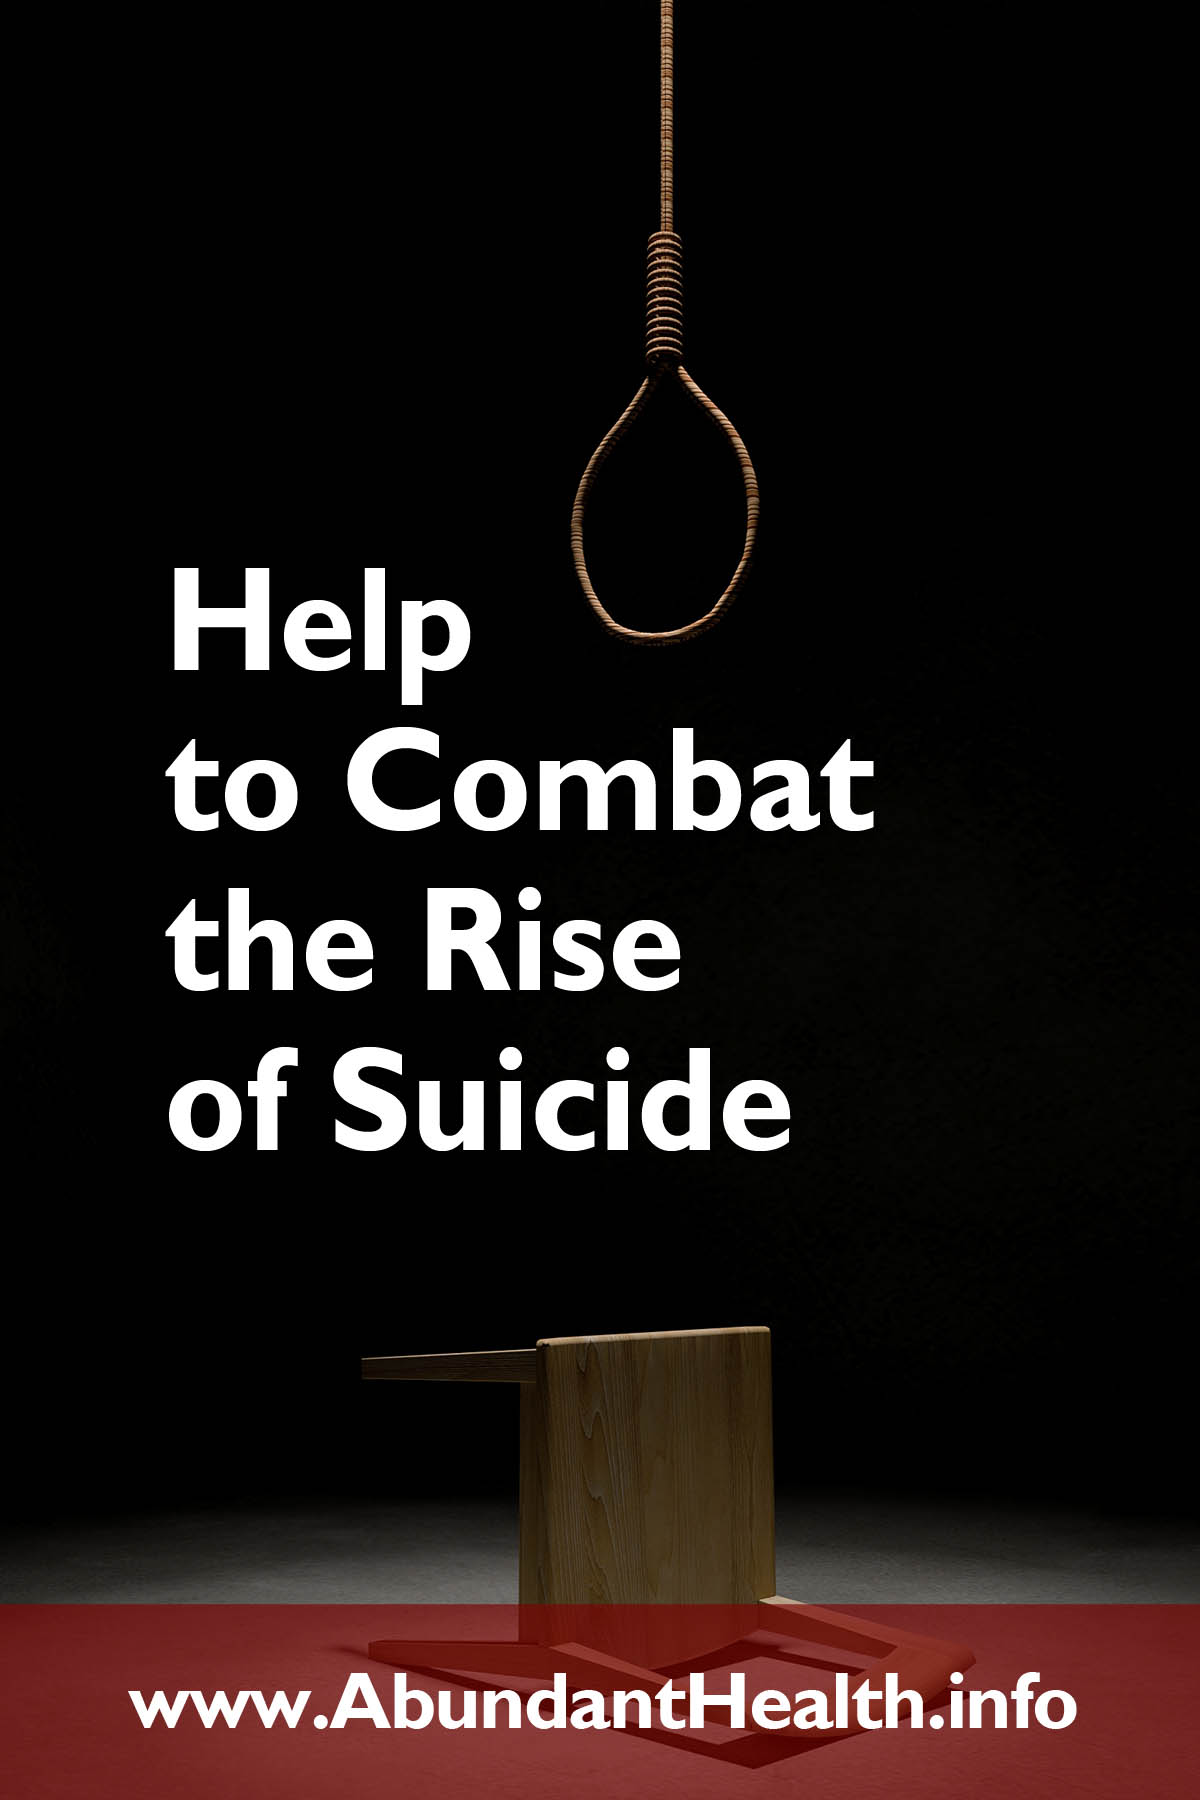 Help to Combat the Rise of Suicide